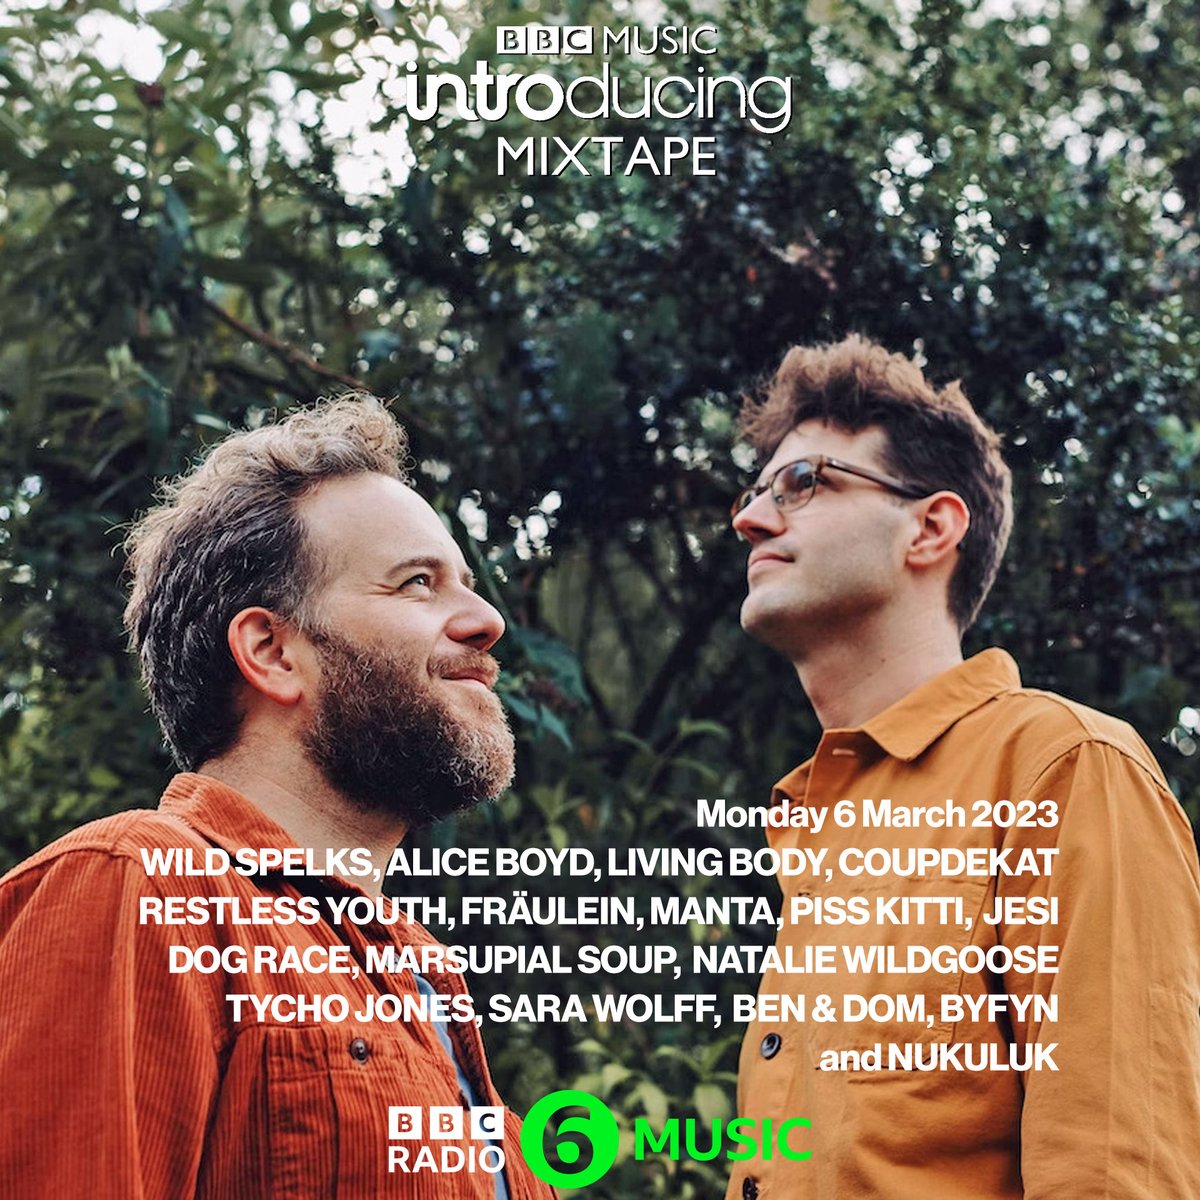 My @bbcintroducing Mixtape drops Mon on @BBCSounds & @BBC6Music. Thanks for finding/supporting/forwarding the tunes to: @nickyrob @threlfalljames @empilbeam @DJ_Roesh @natalieeveradio @Dave_Monks @JerichoKeys @jjiszatt Specially @whatanhonor @kianboylephotos who supplied 4 of em